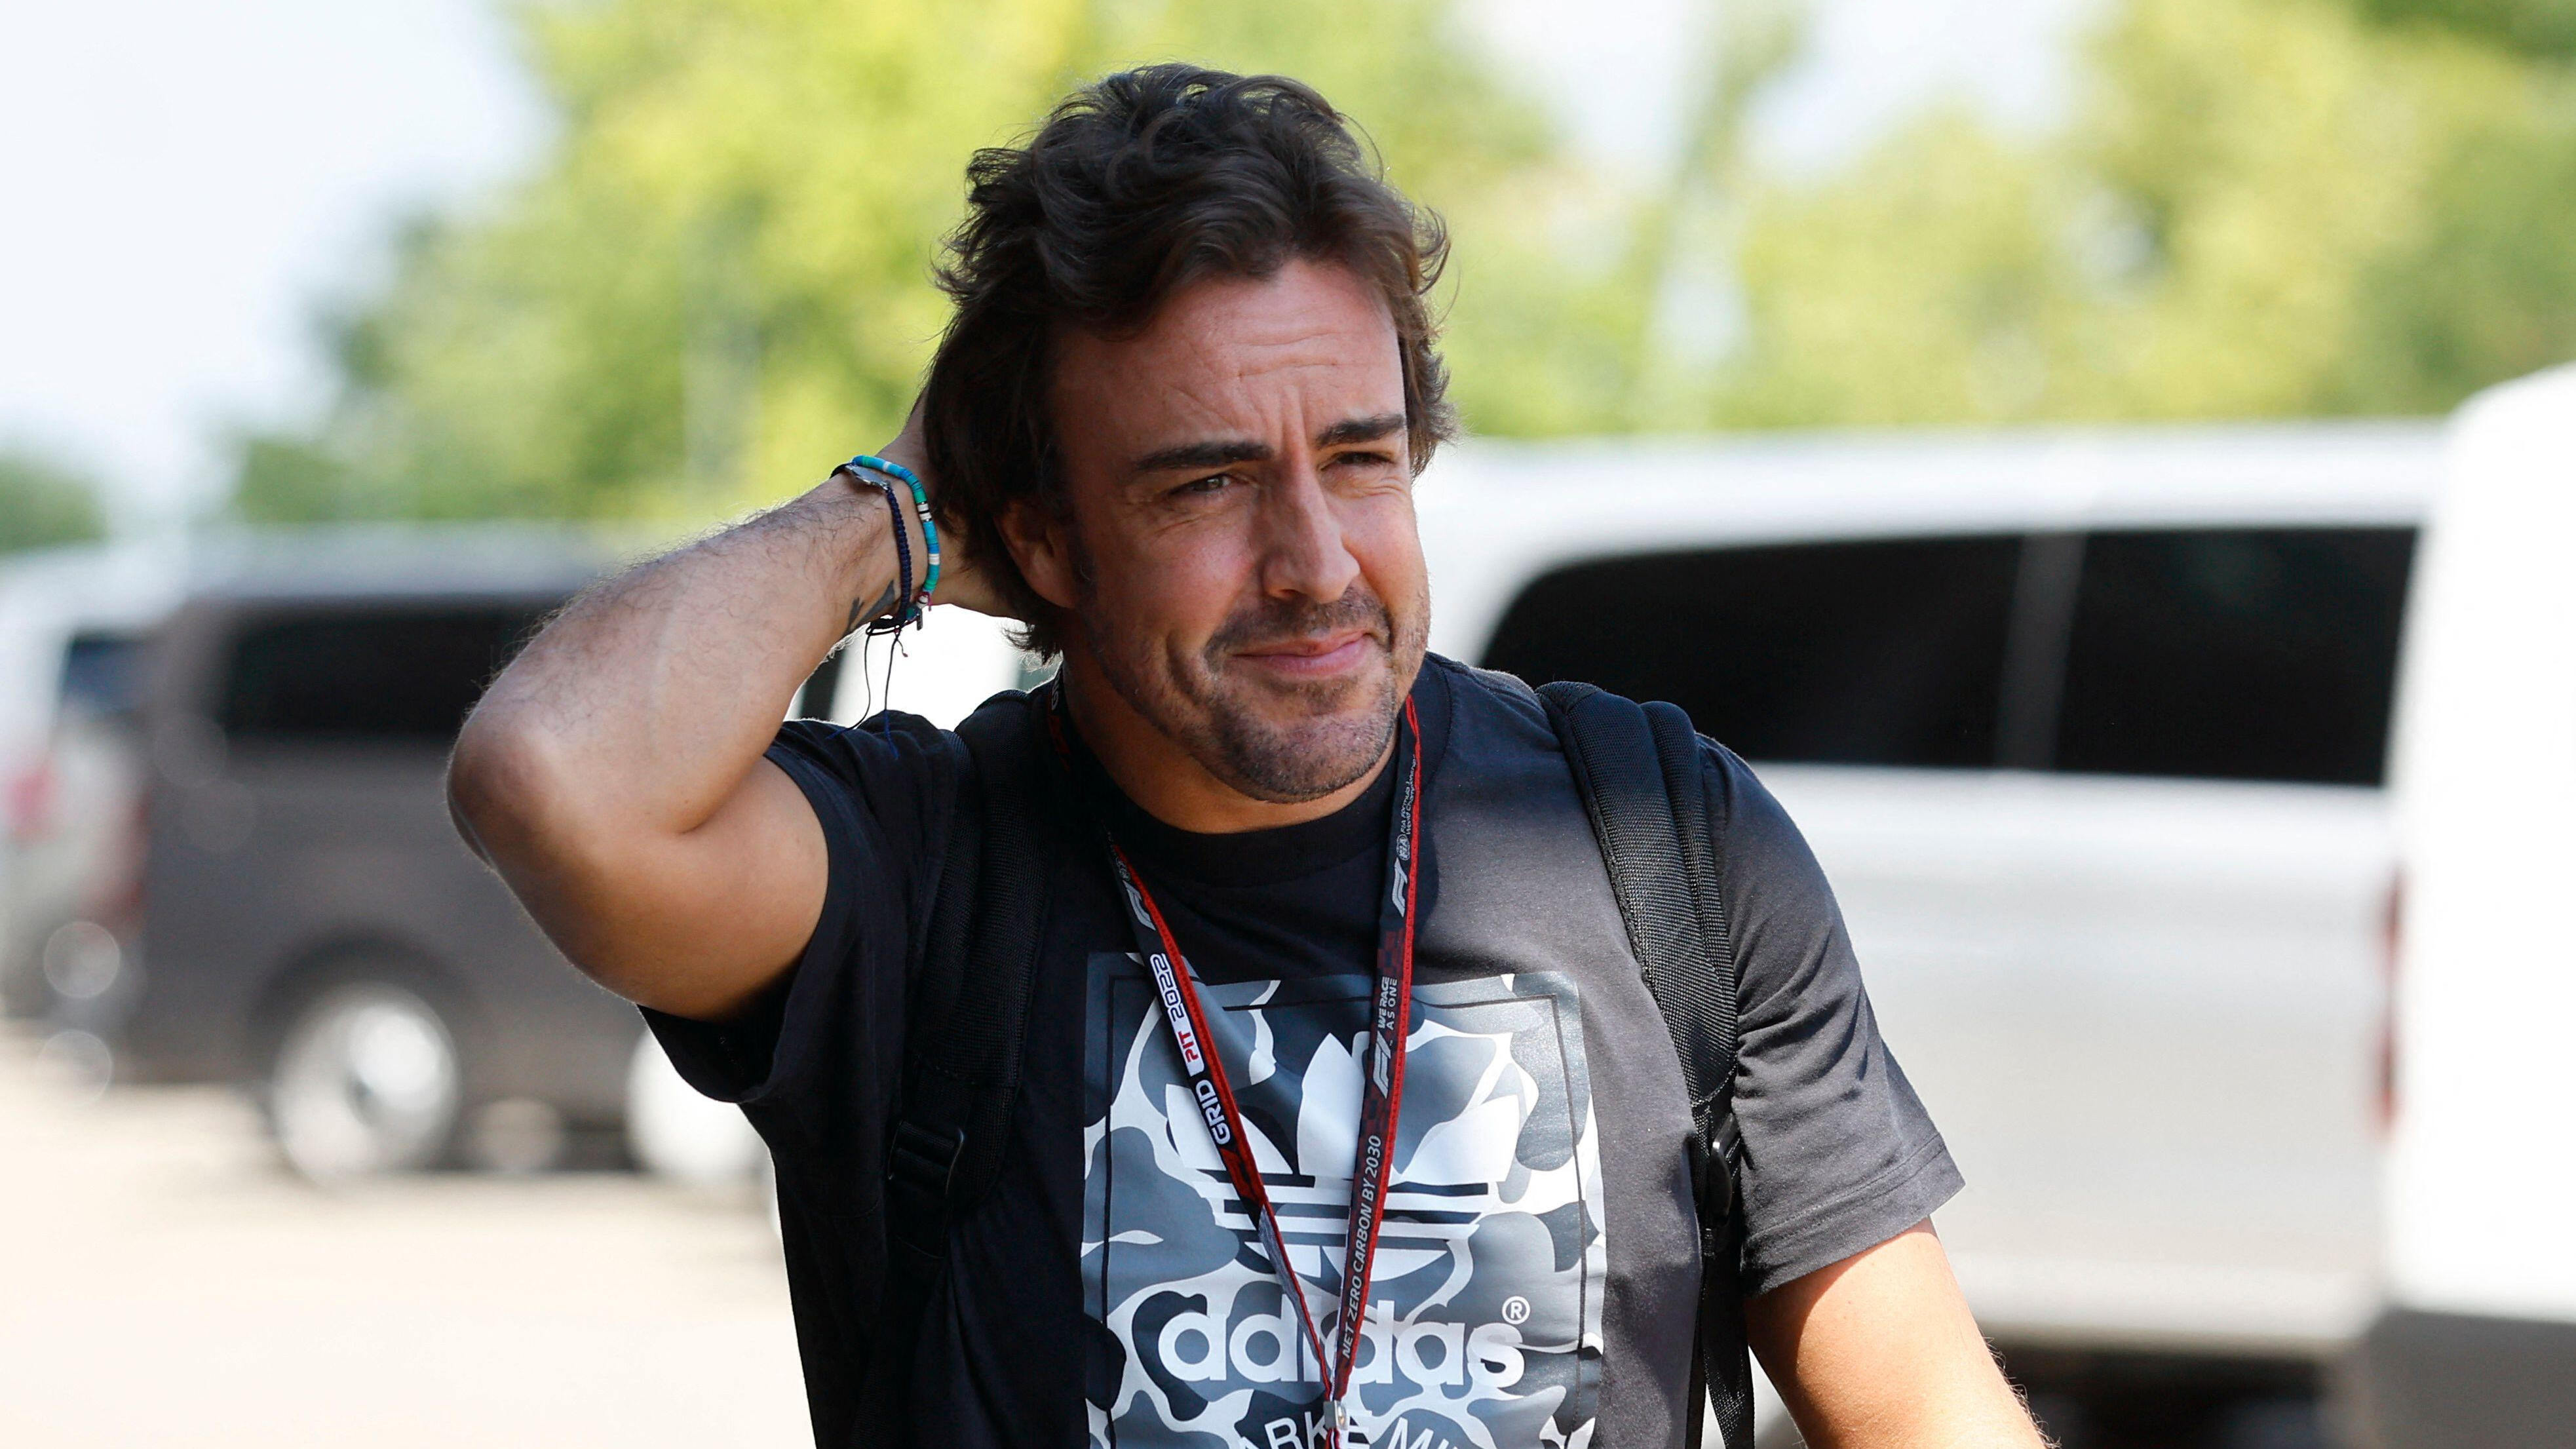 Fernando Alonso signs to Aston Martin for 2023 on multi-year contract